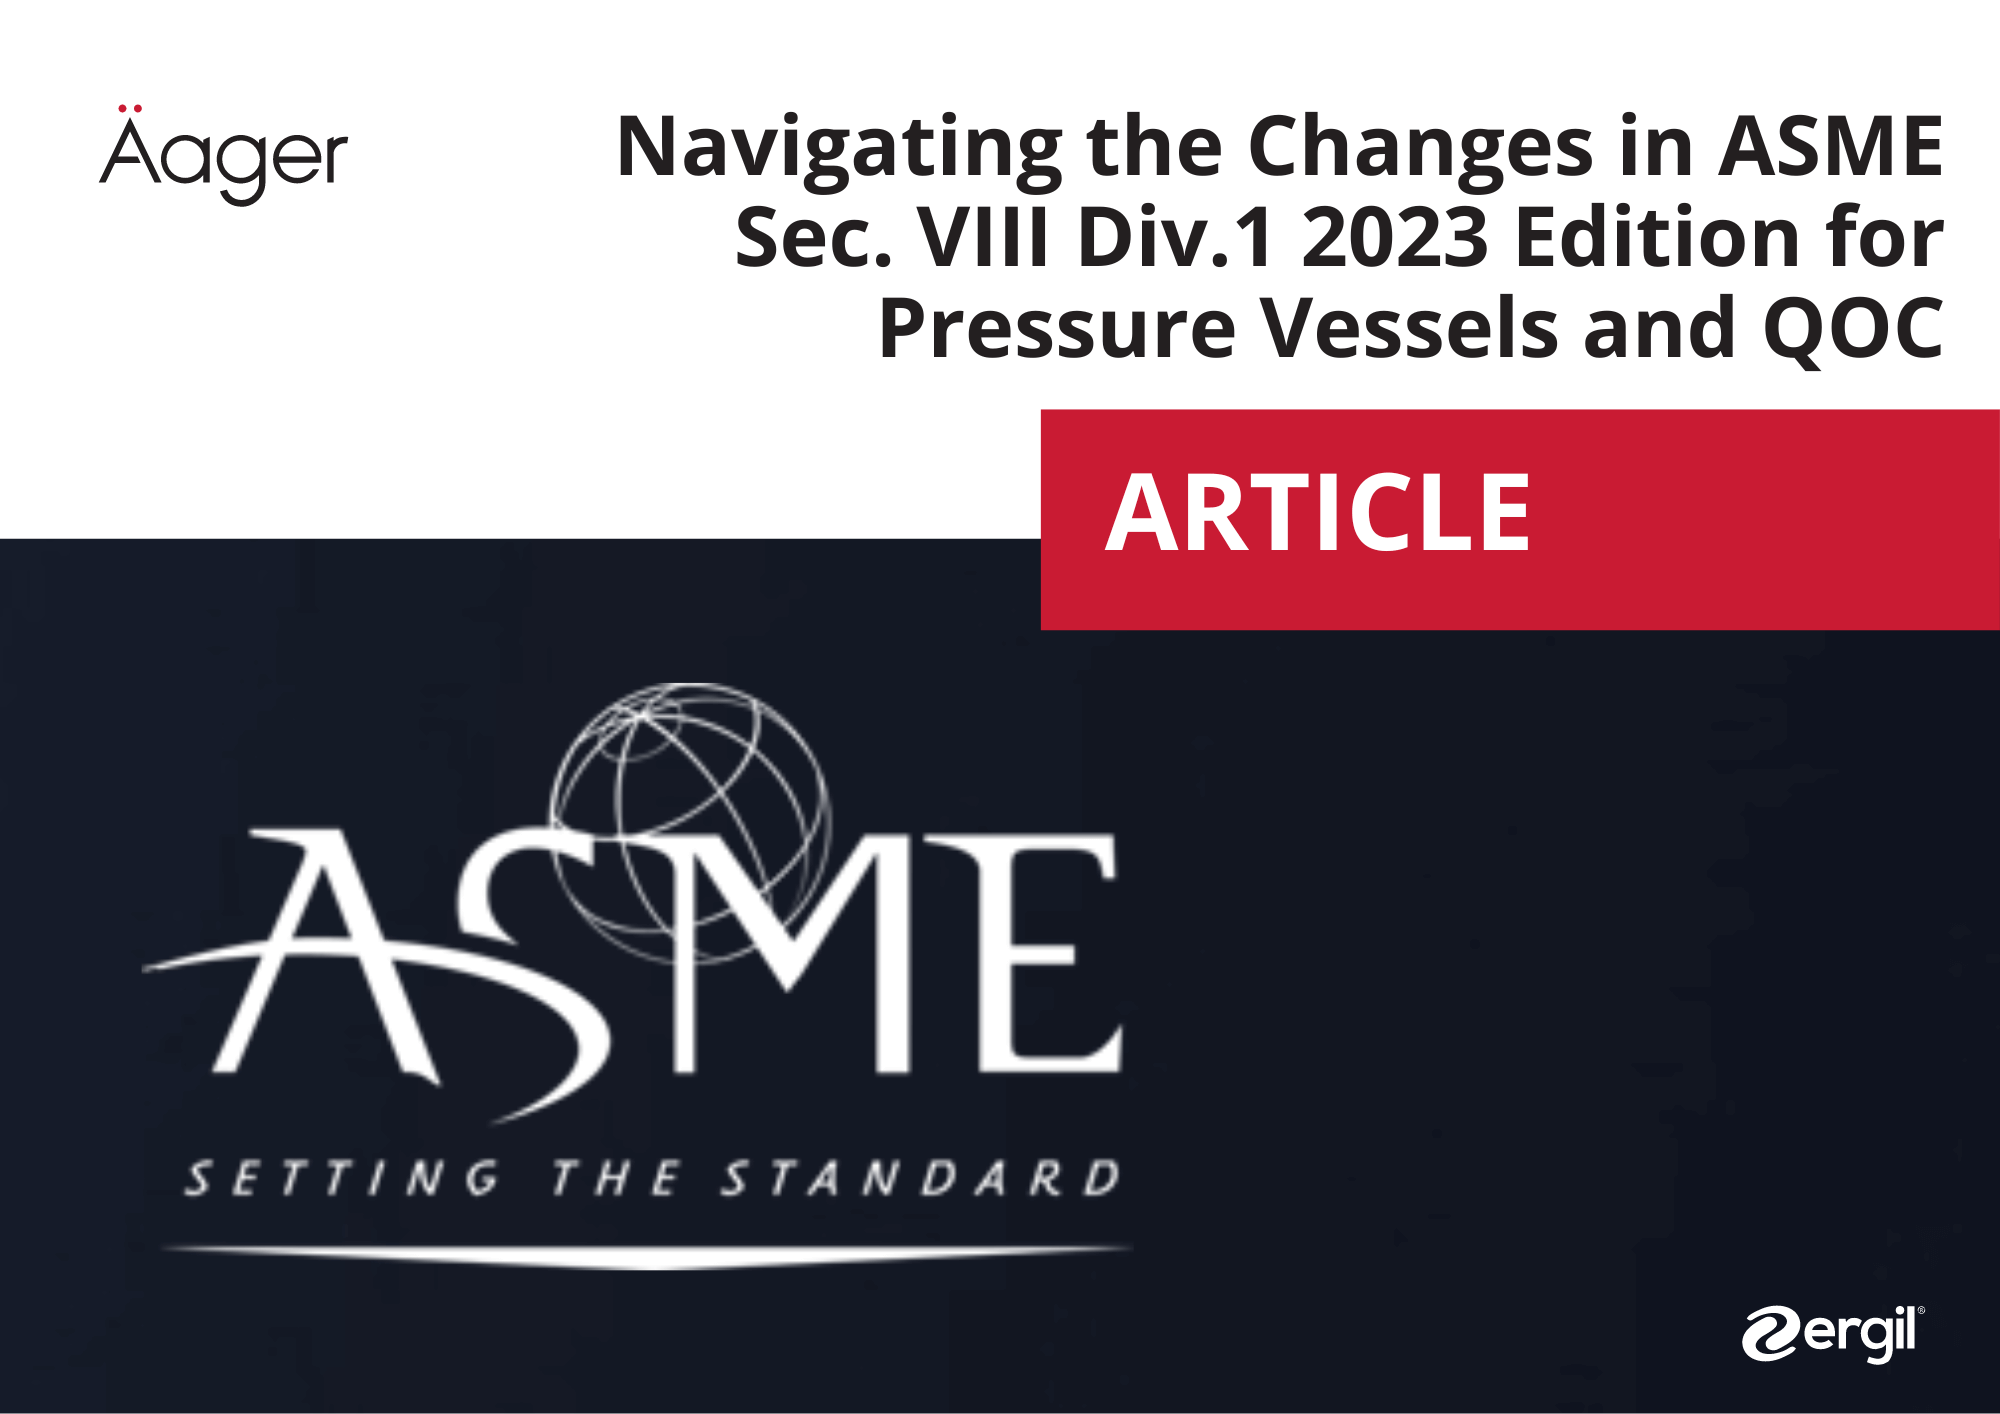 Navigating the Changes in ASME Sec. VIII Div.1 2023 Edition for Pressure Vessels and QOC 36